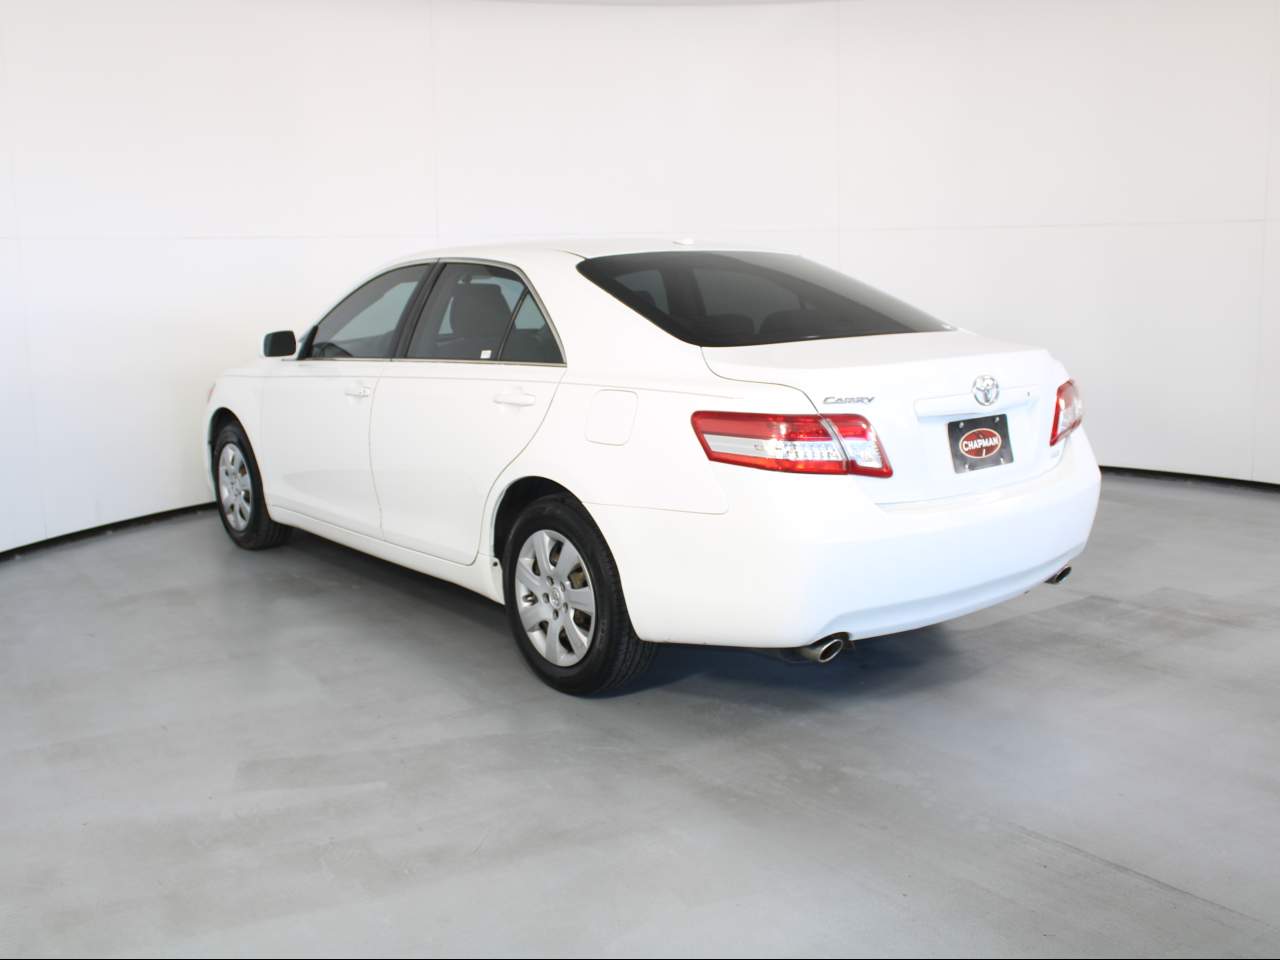 2010 Toyota Camry LE V6